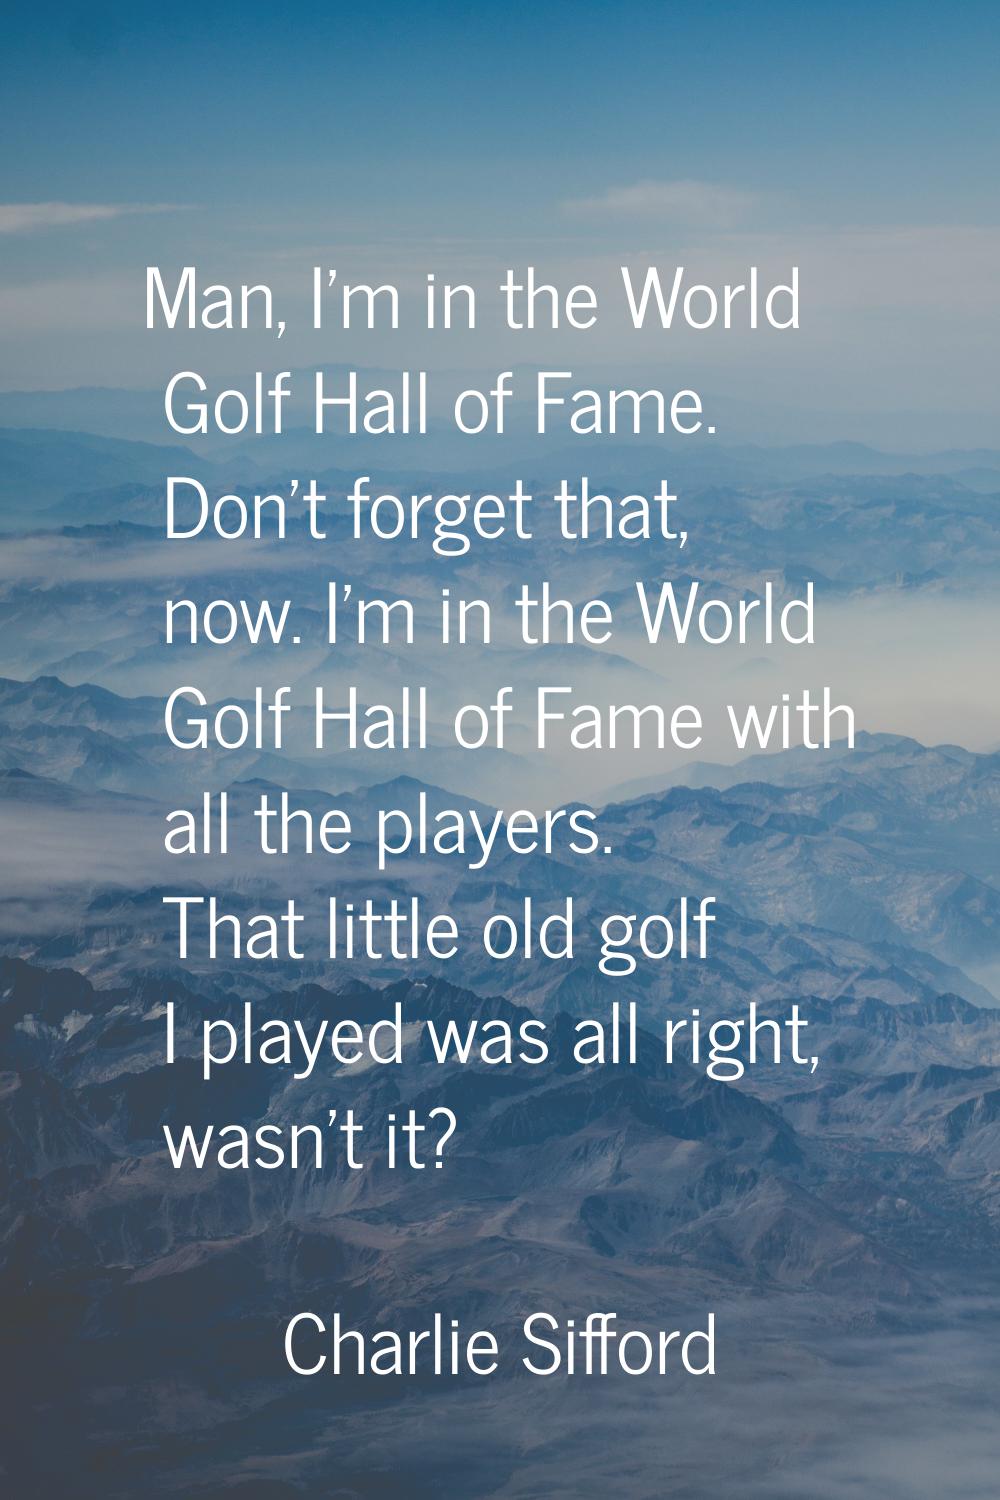 Man, I'm in the World Golf Hall of Fame. Don't forget that, now. I'm in the World Golf Hall of Fame